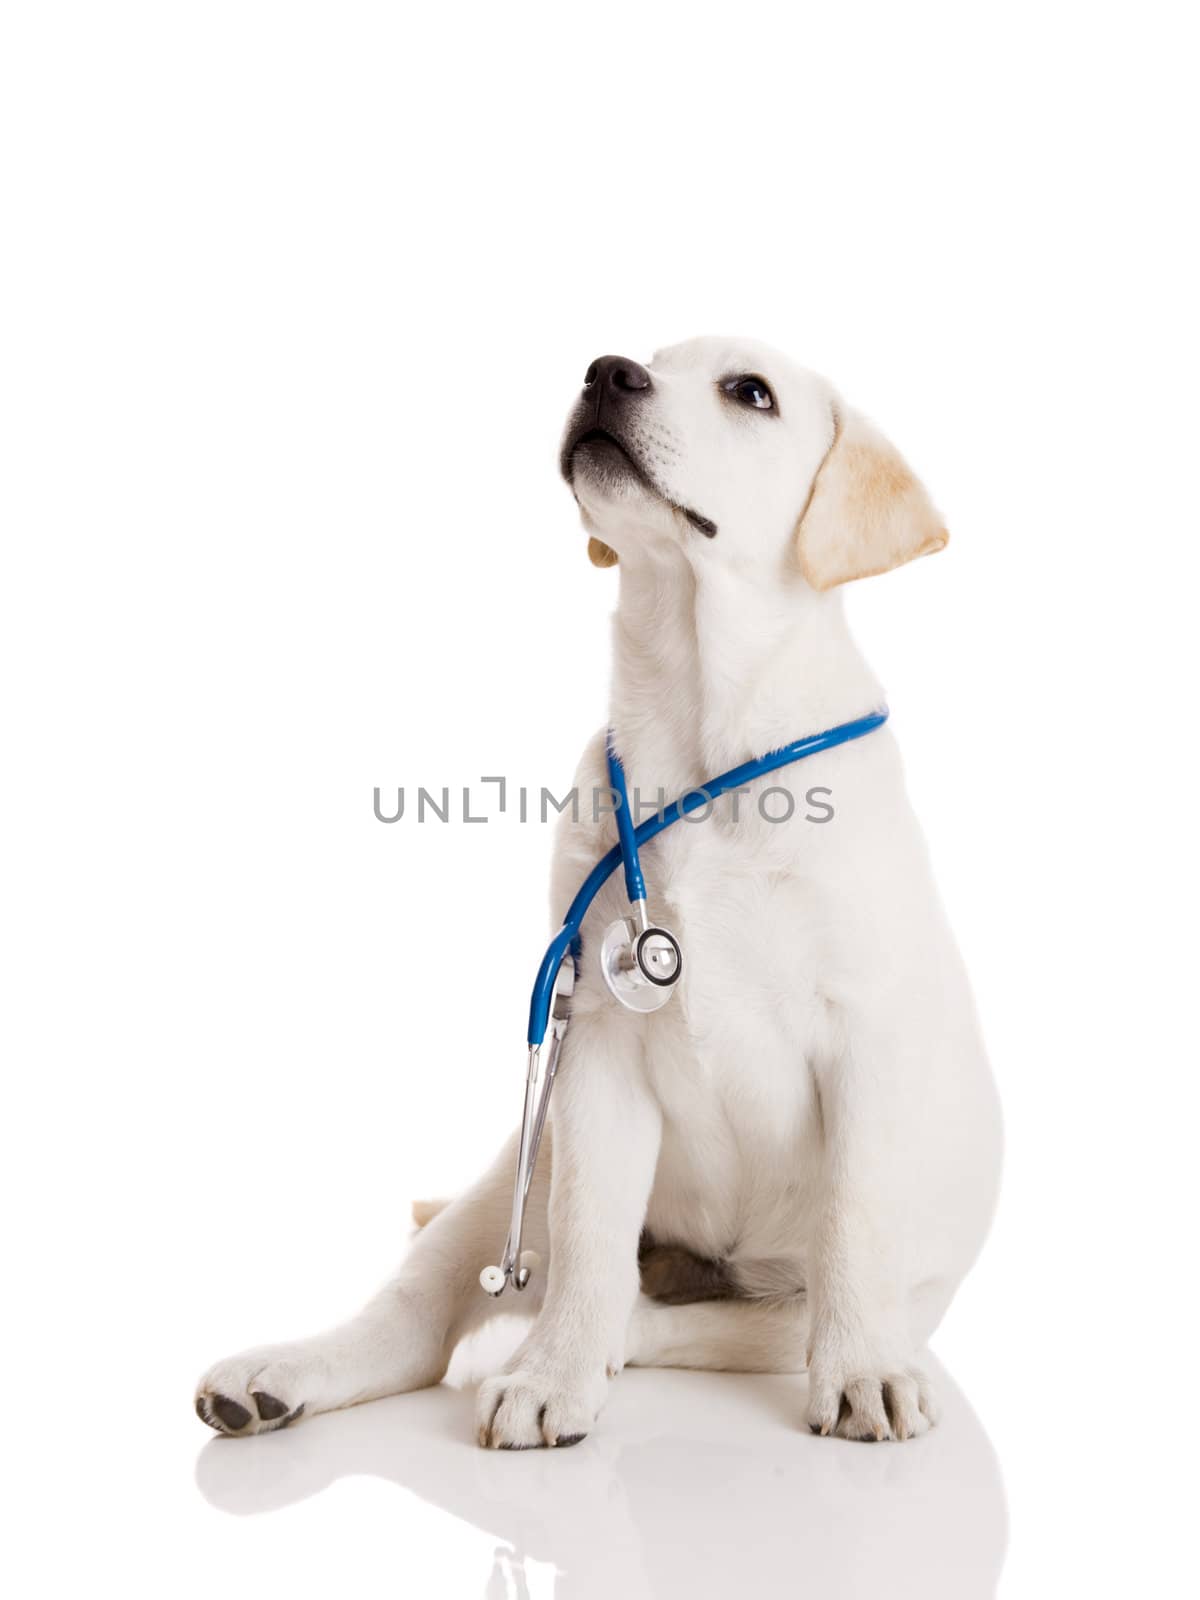 Beautiful labrador retriever with a stethoscope on his neck, isolated on white